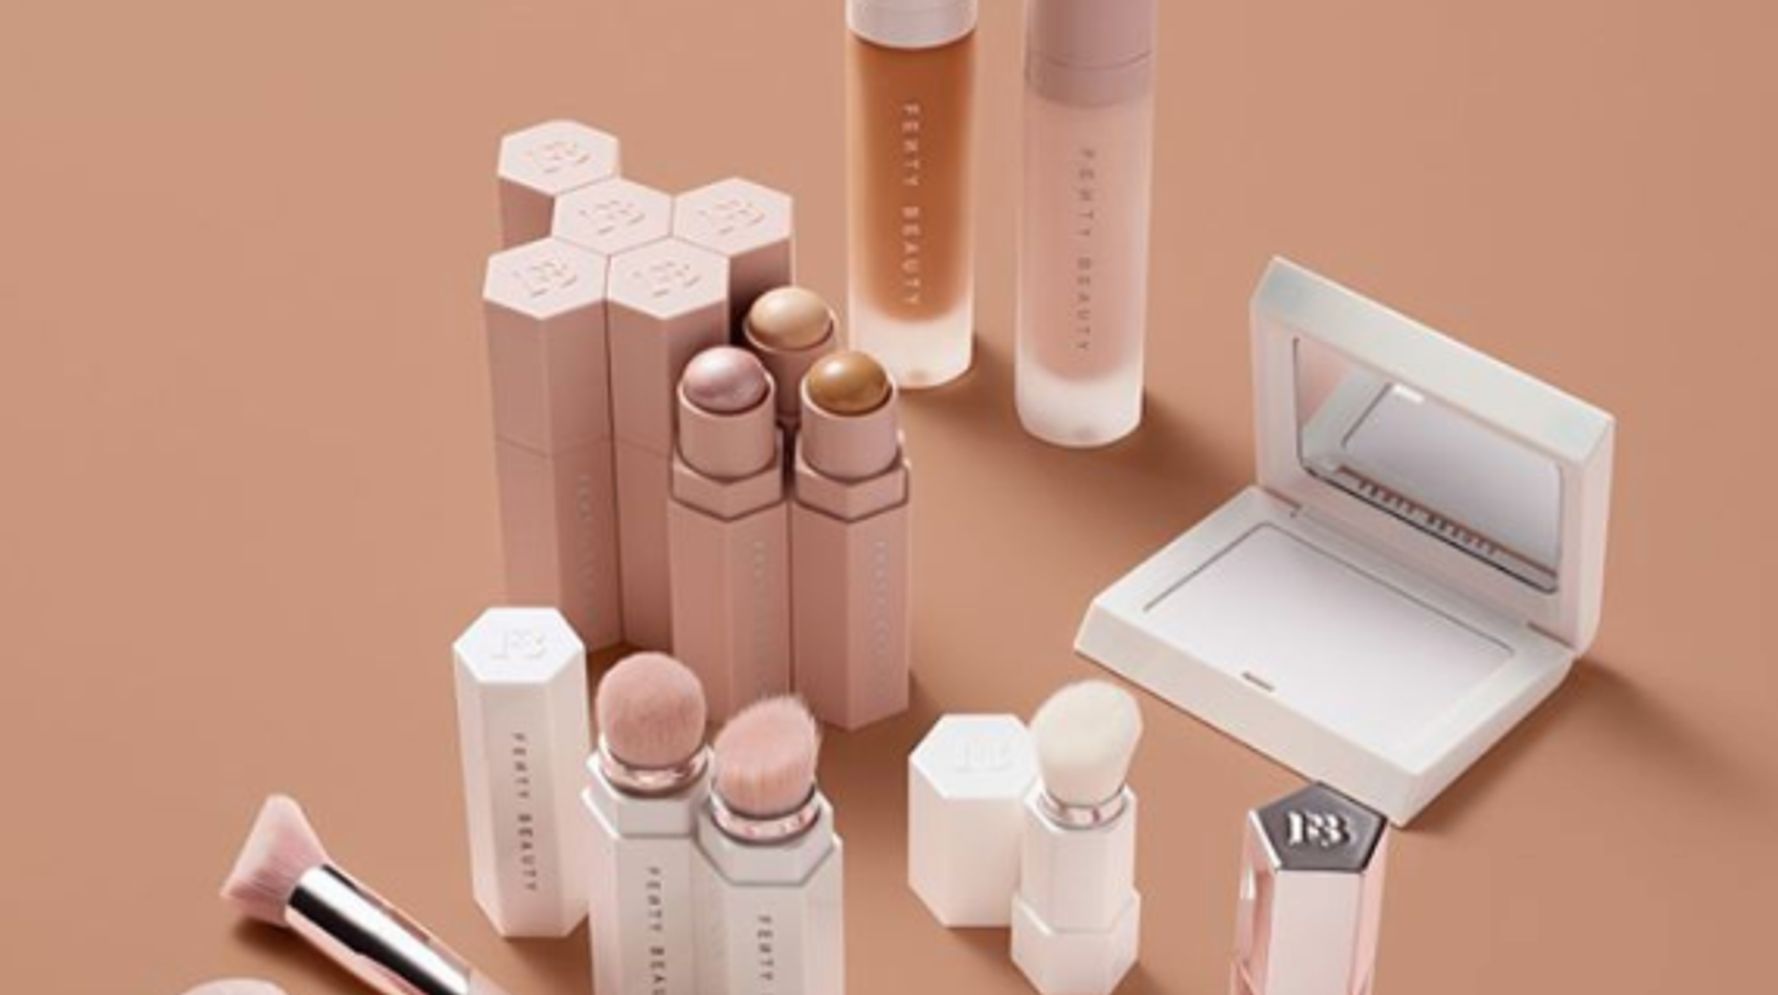 Rihanna's Fenty Beauty Launch Offered a Much-Needed Dose of